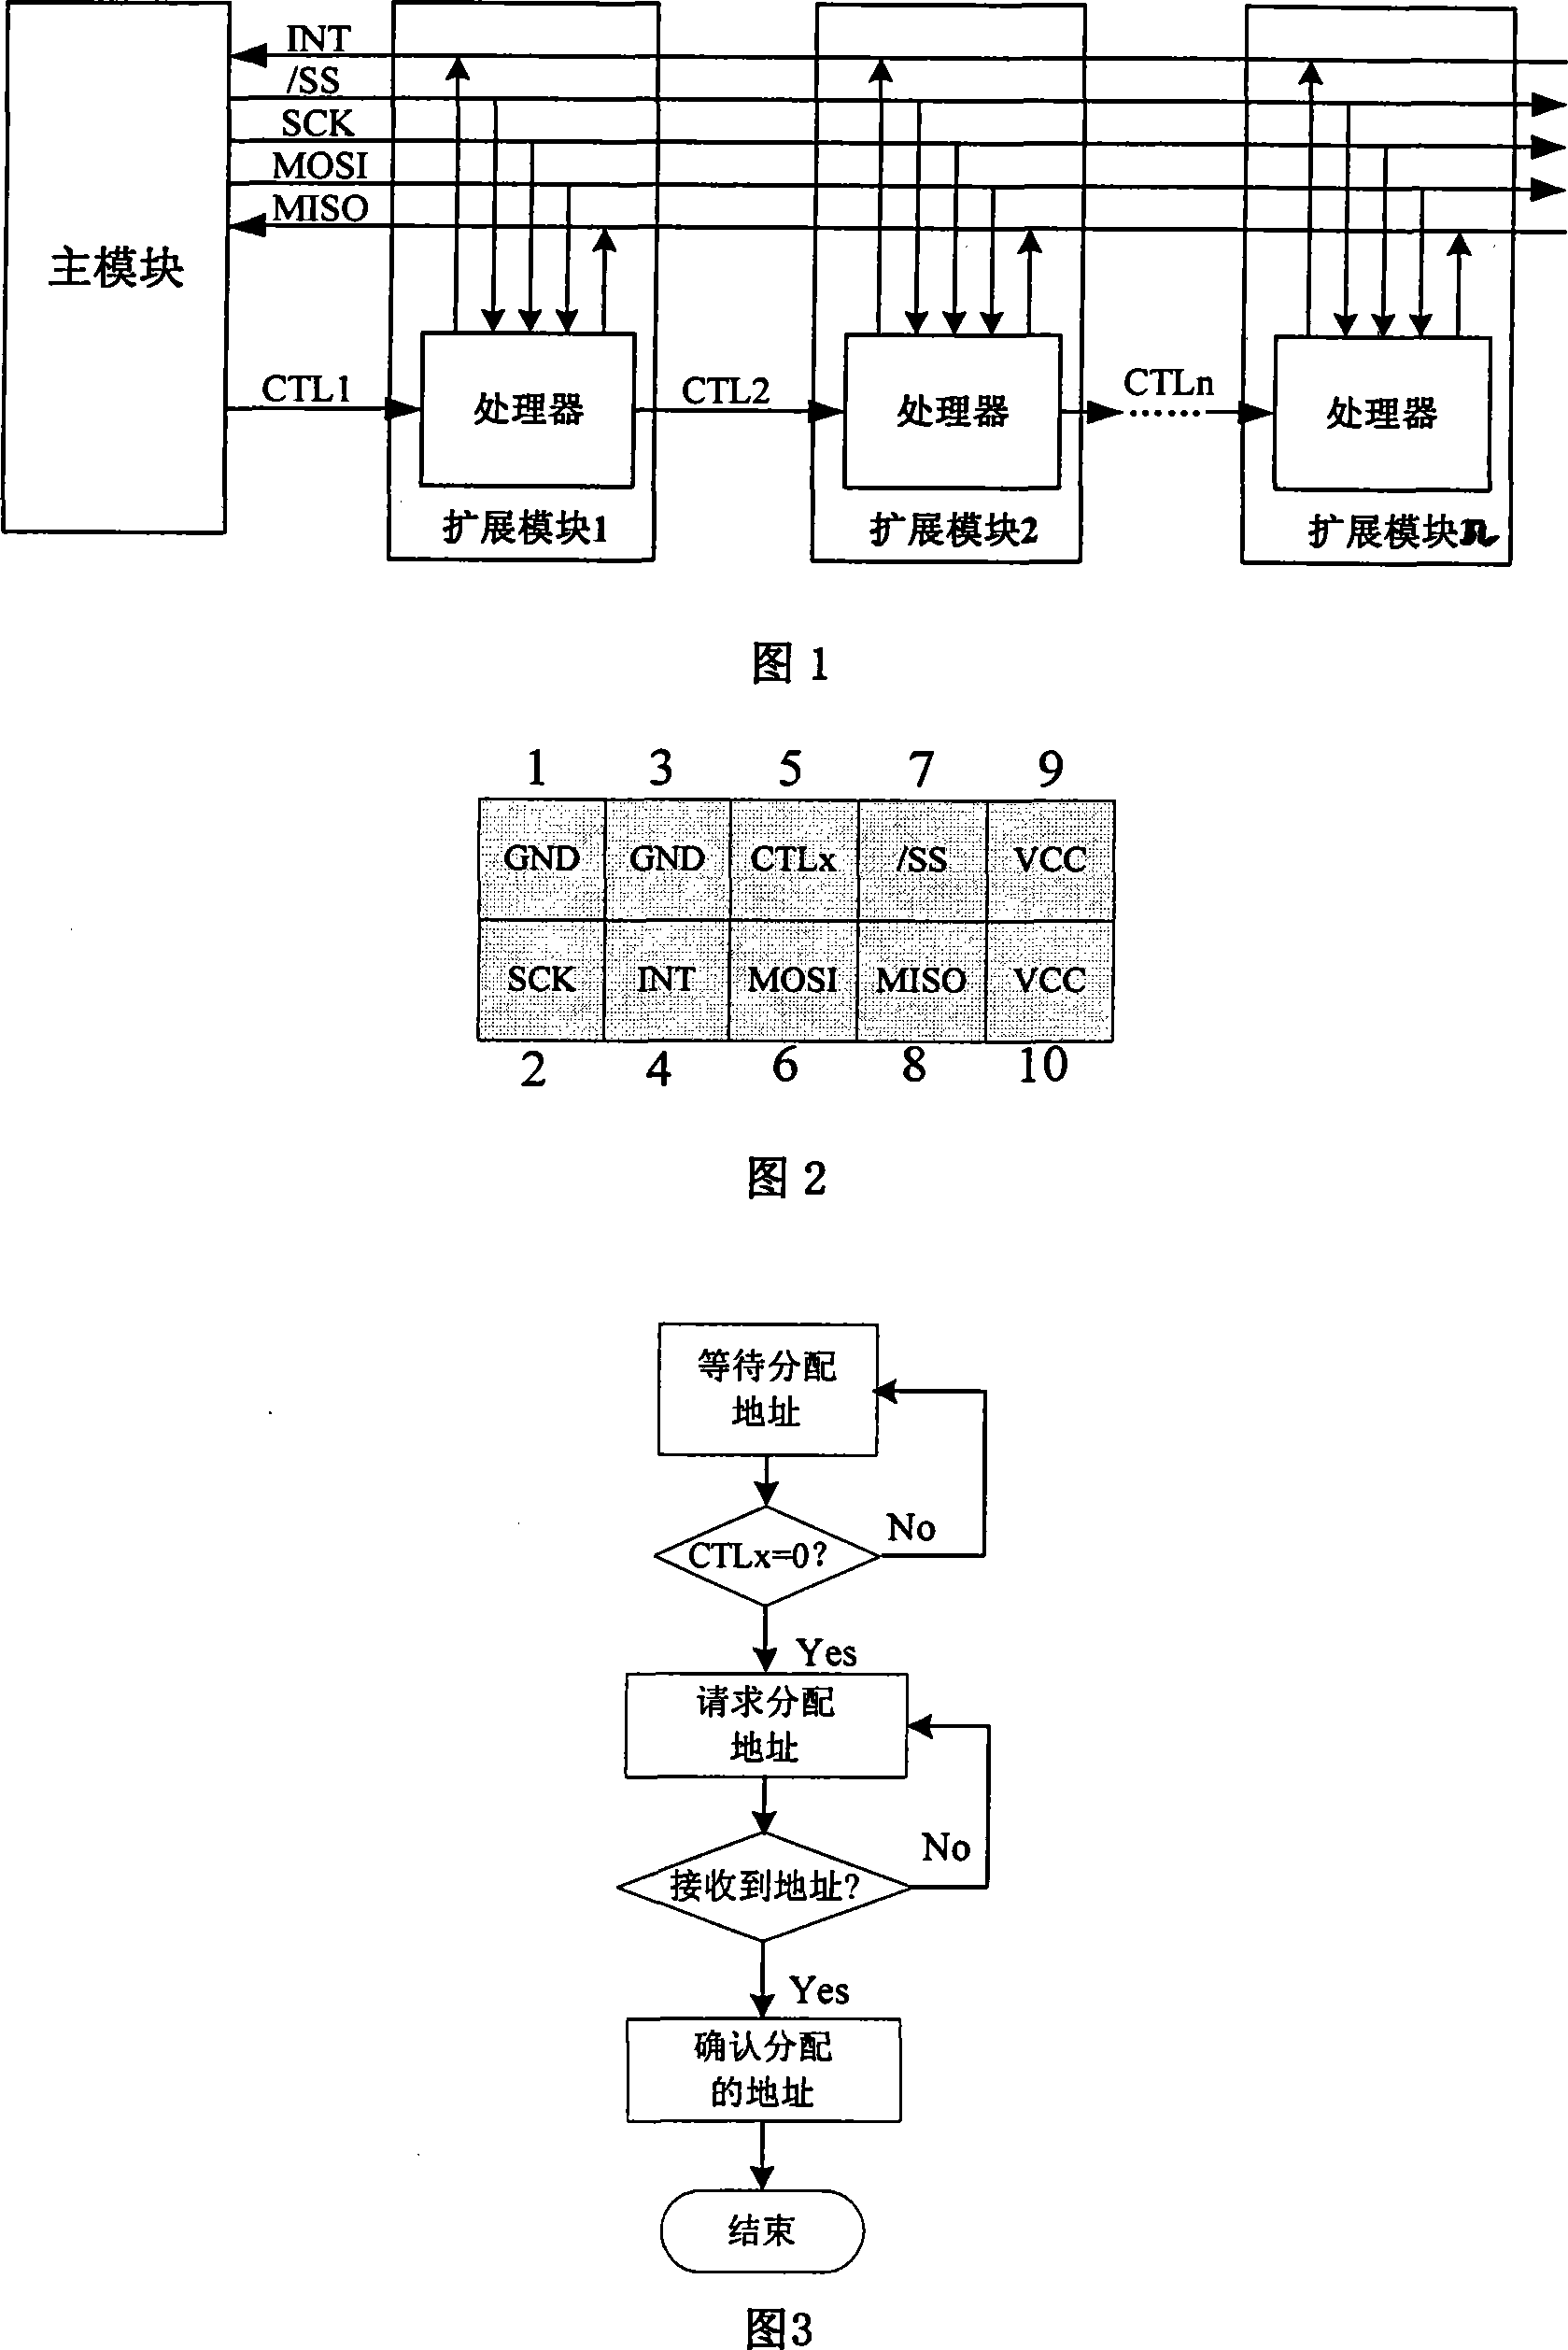 Programmable logic controller and expansion module interface